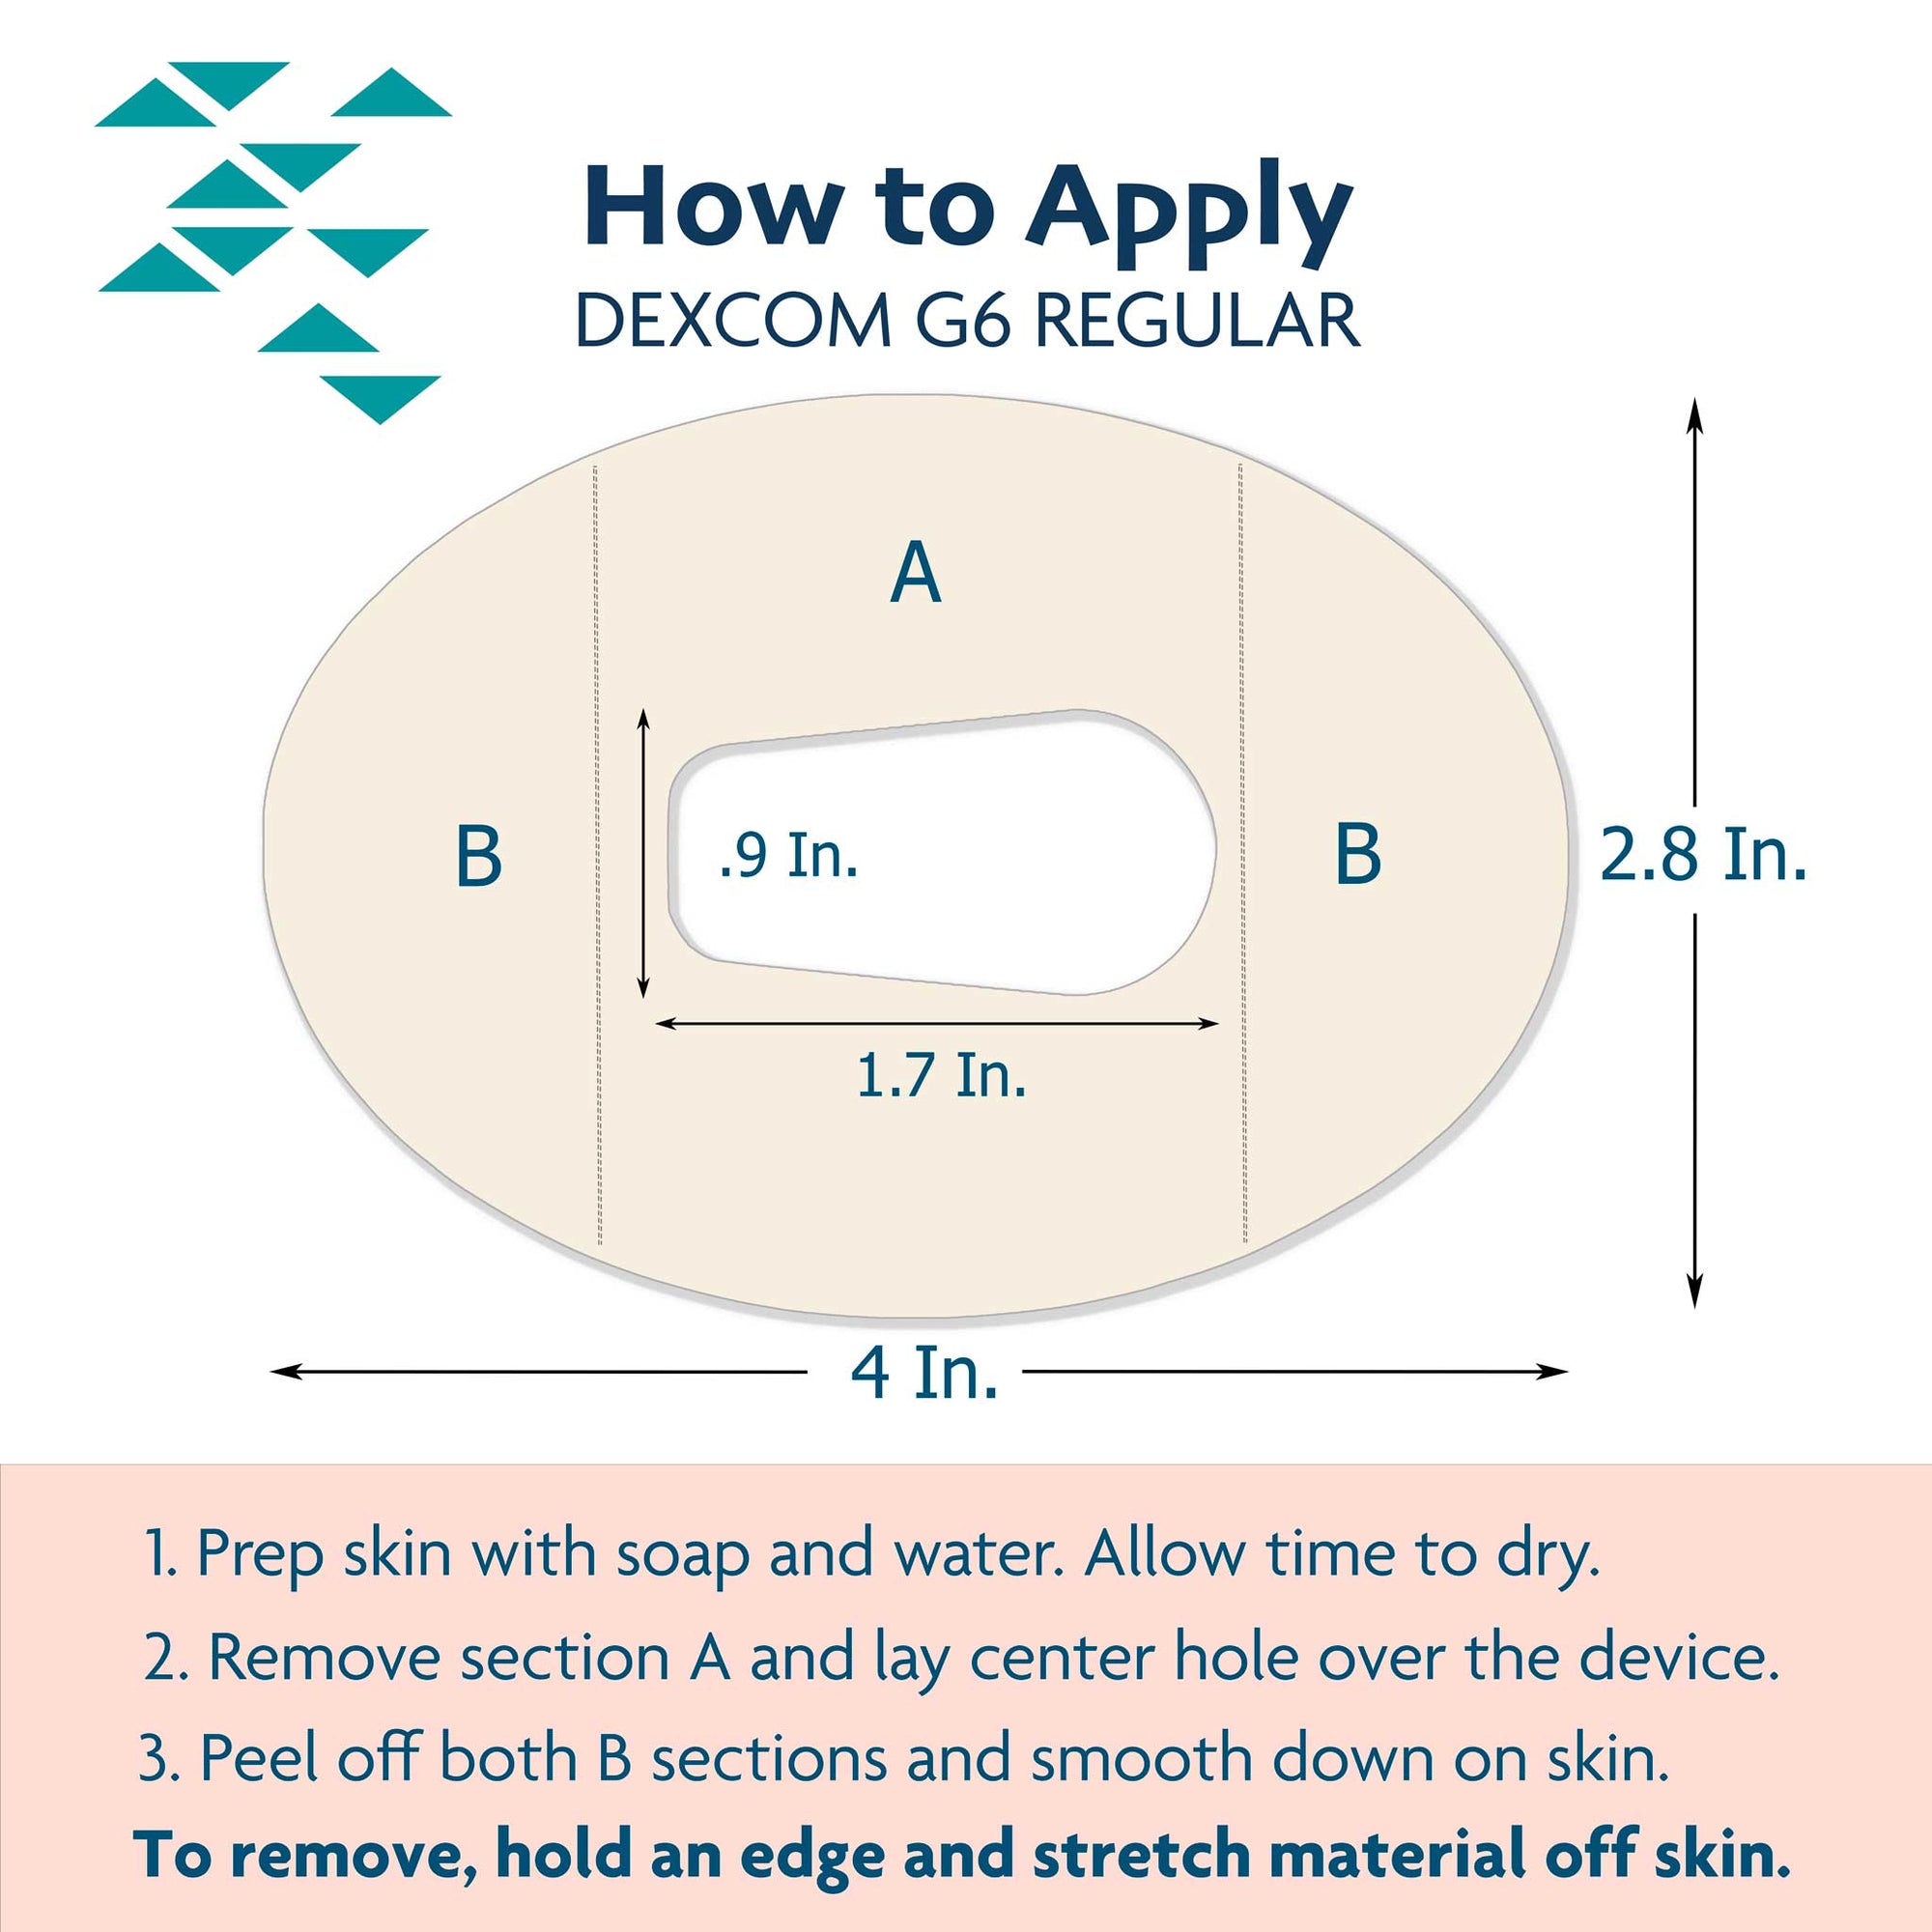 Instructions for securing adhesive patch on top of Dexcom G6 site